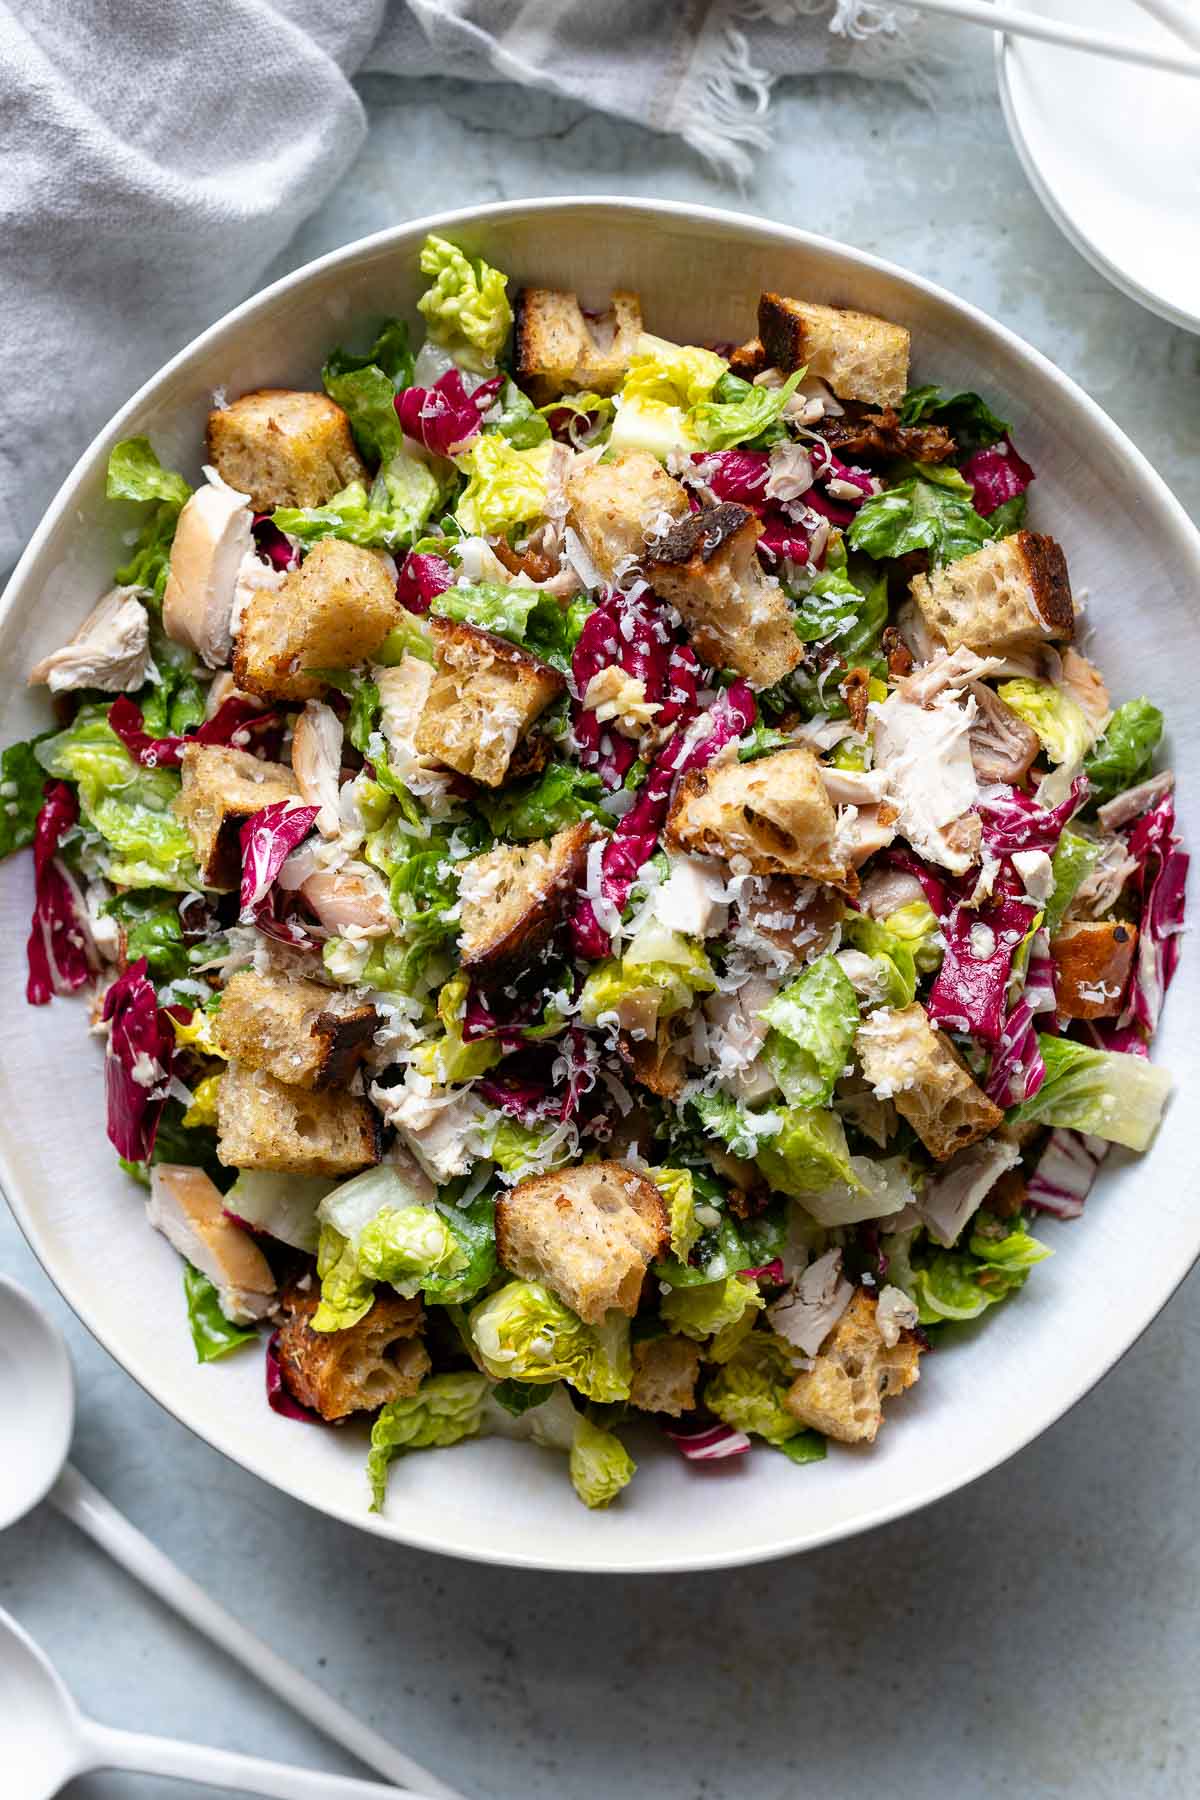 Classic Caesar Salad with Roasted Chickent